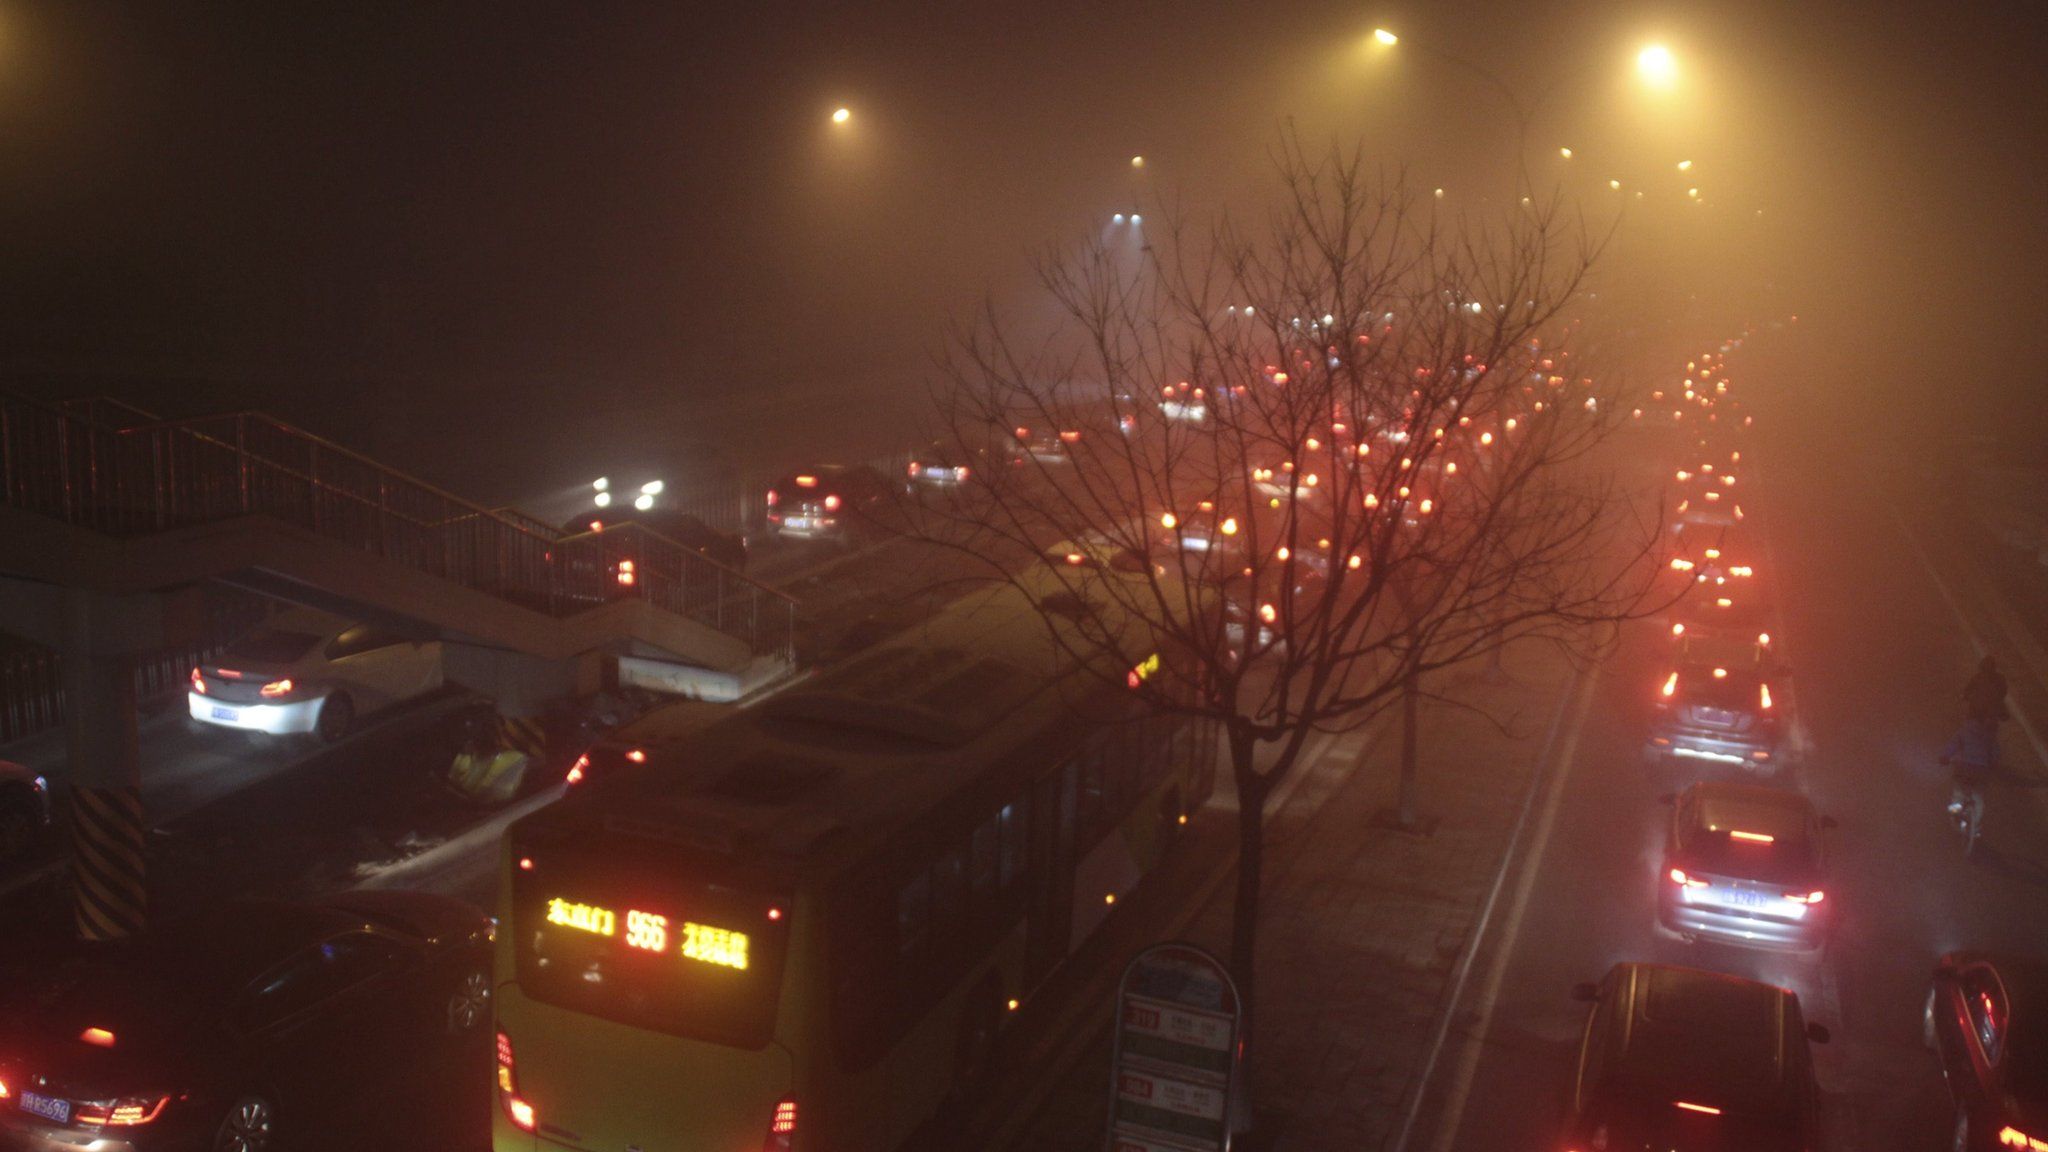 A traffic jam in thick smog, at night